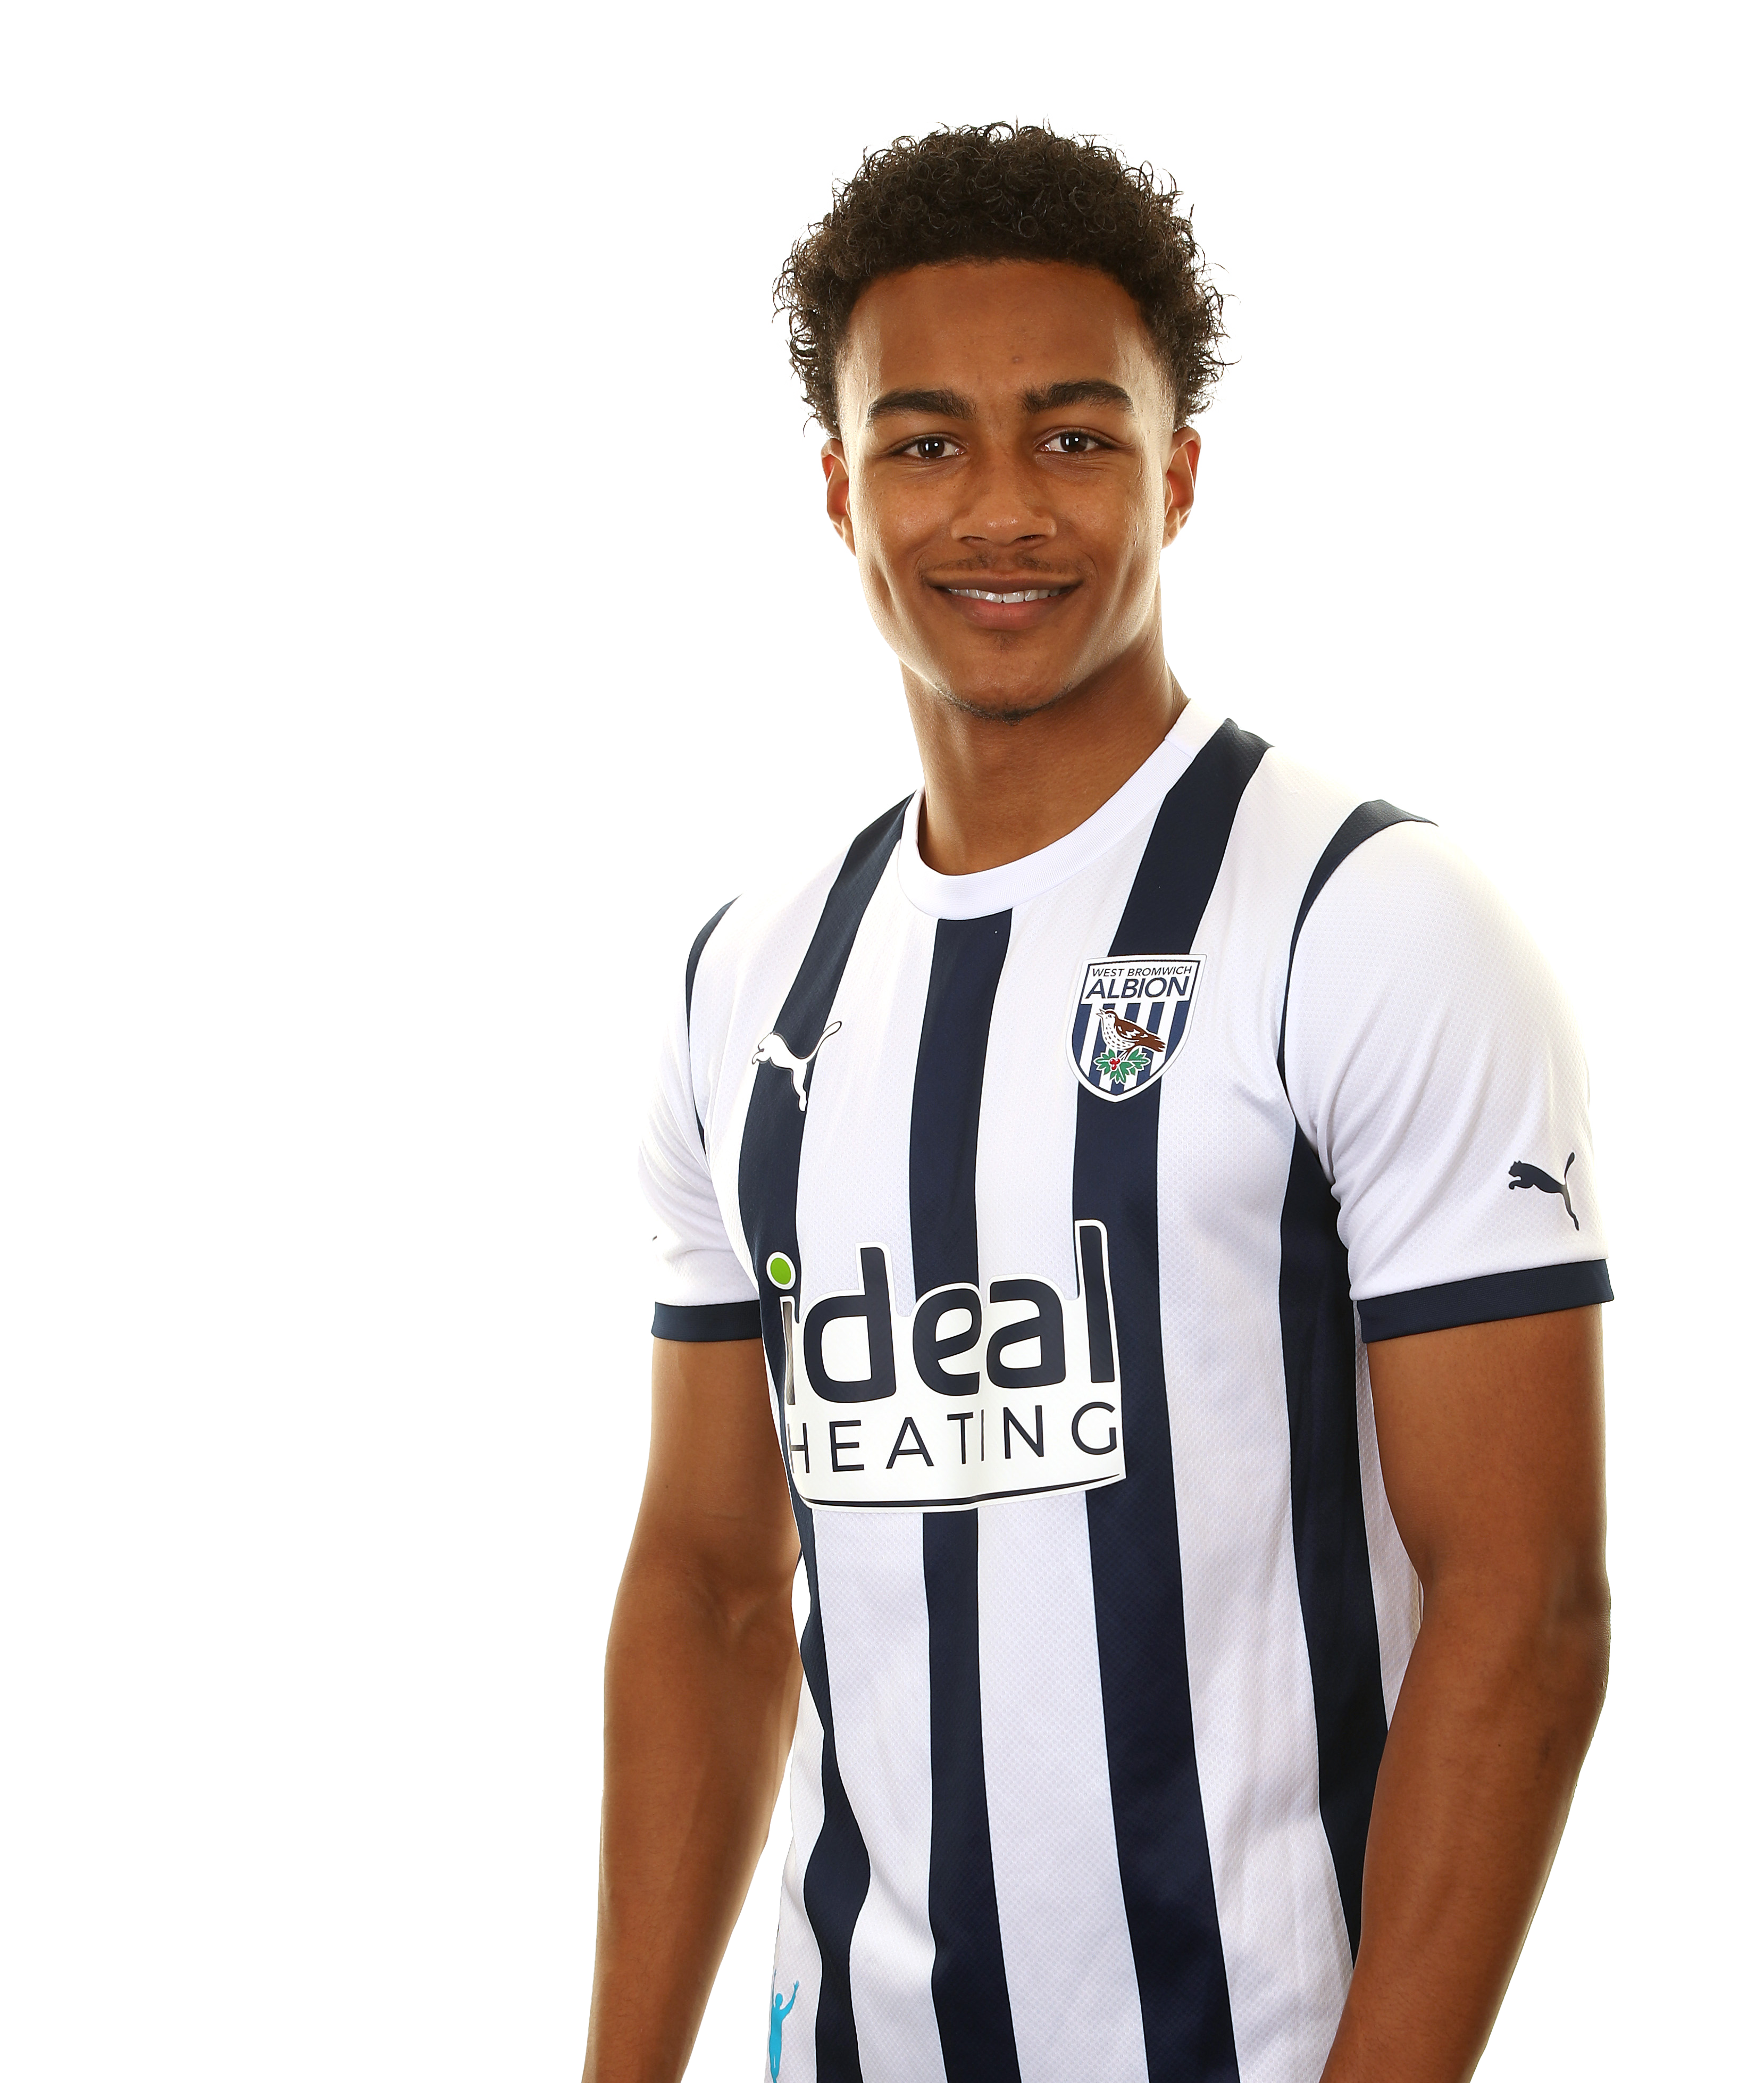 A photo headshot of Albion Under-21s player Narel Phillips ahead of the 2023/24 season